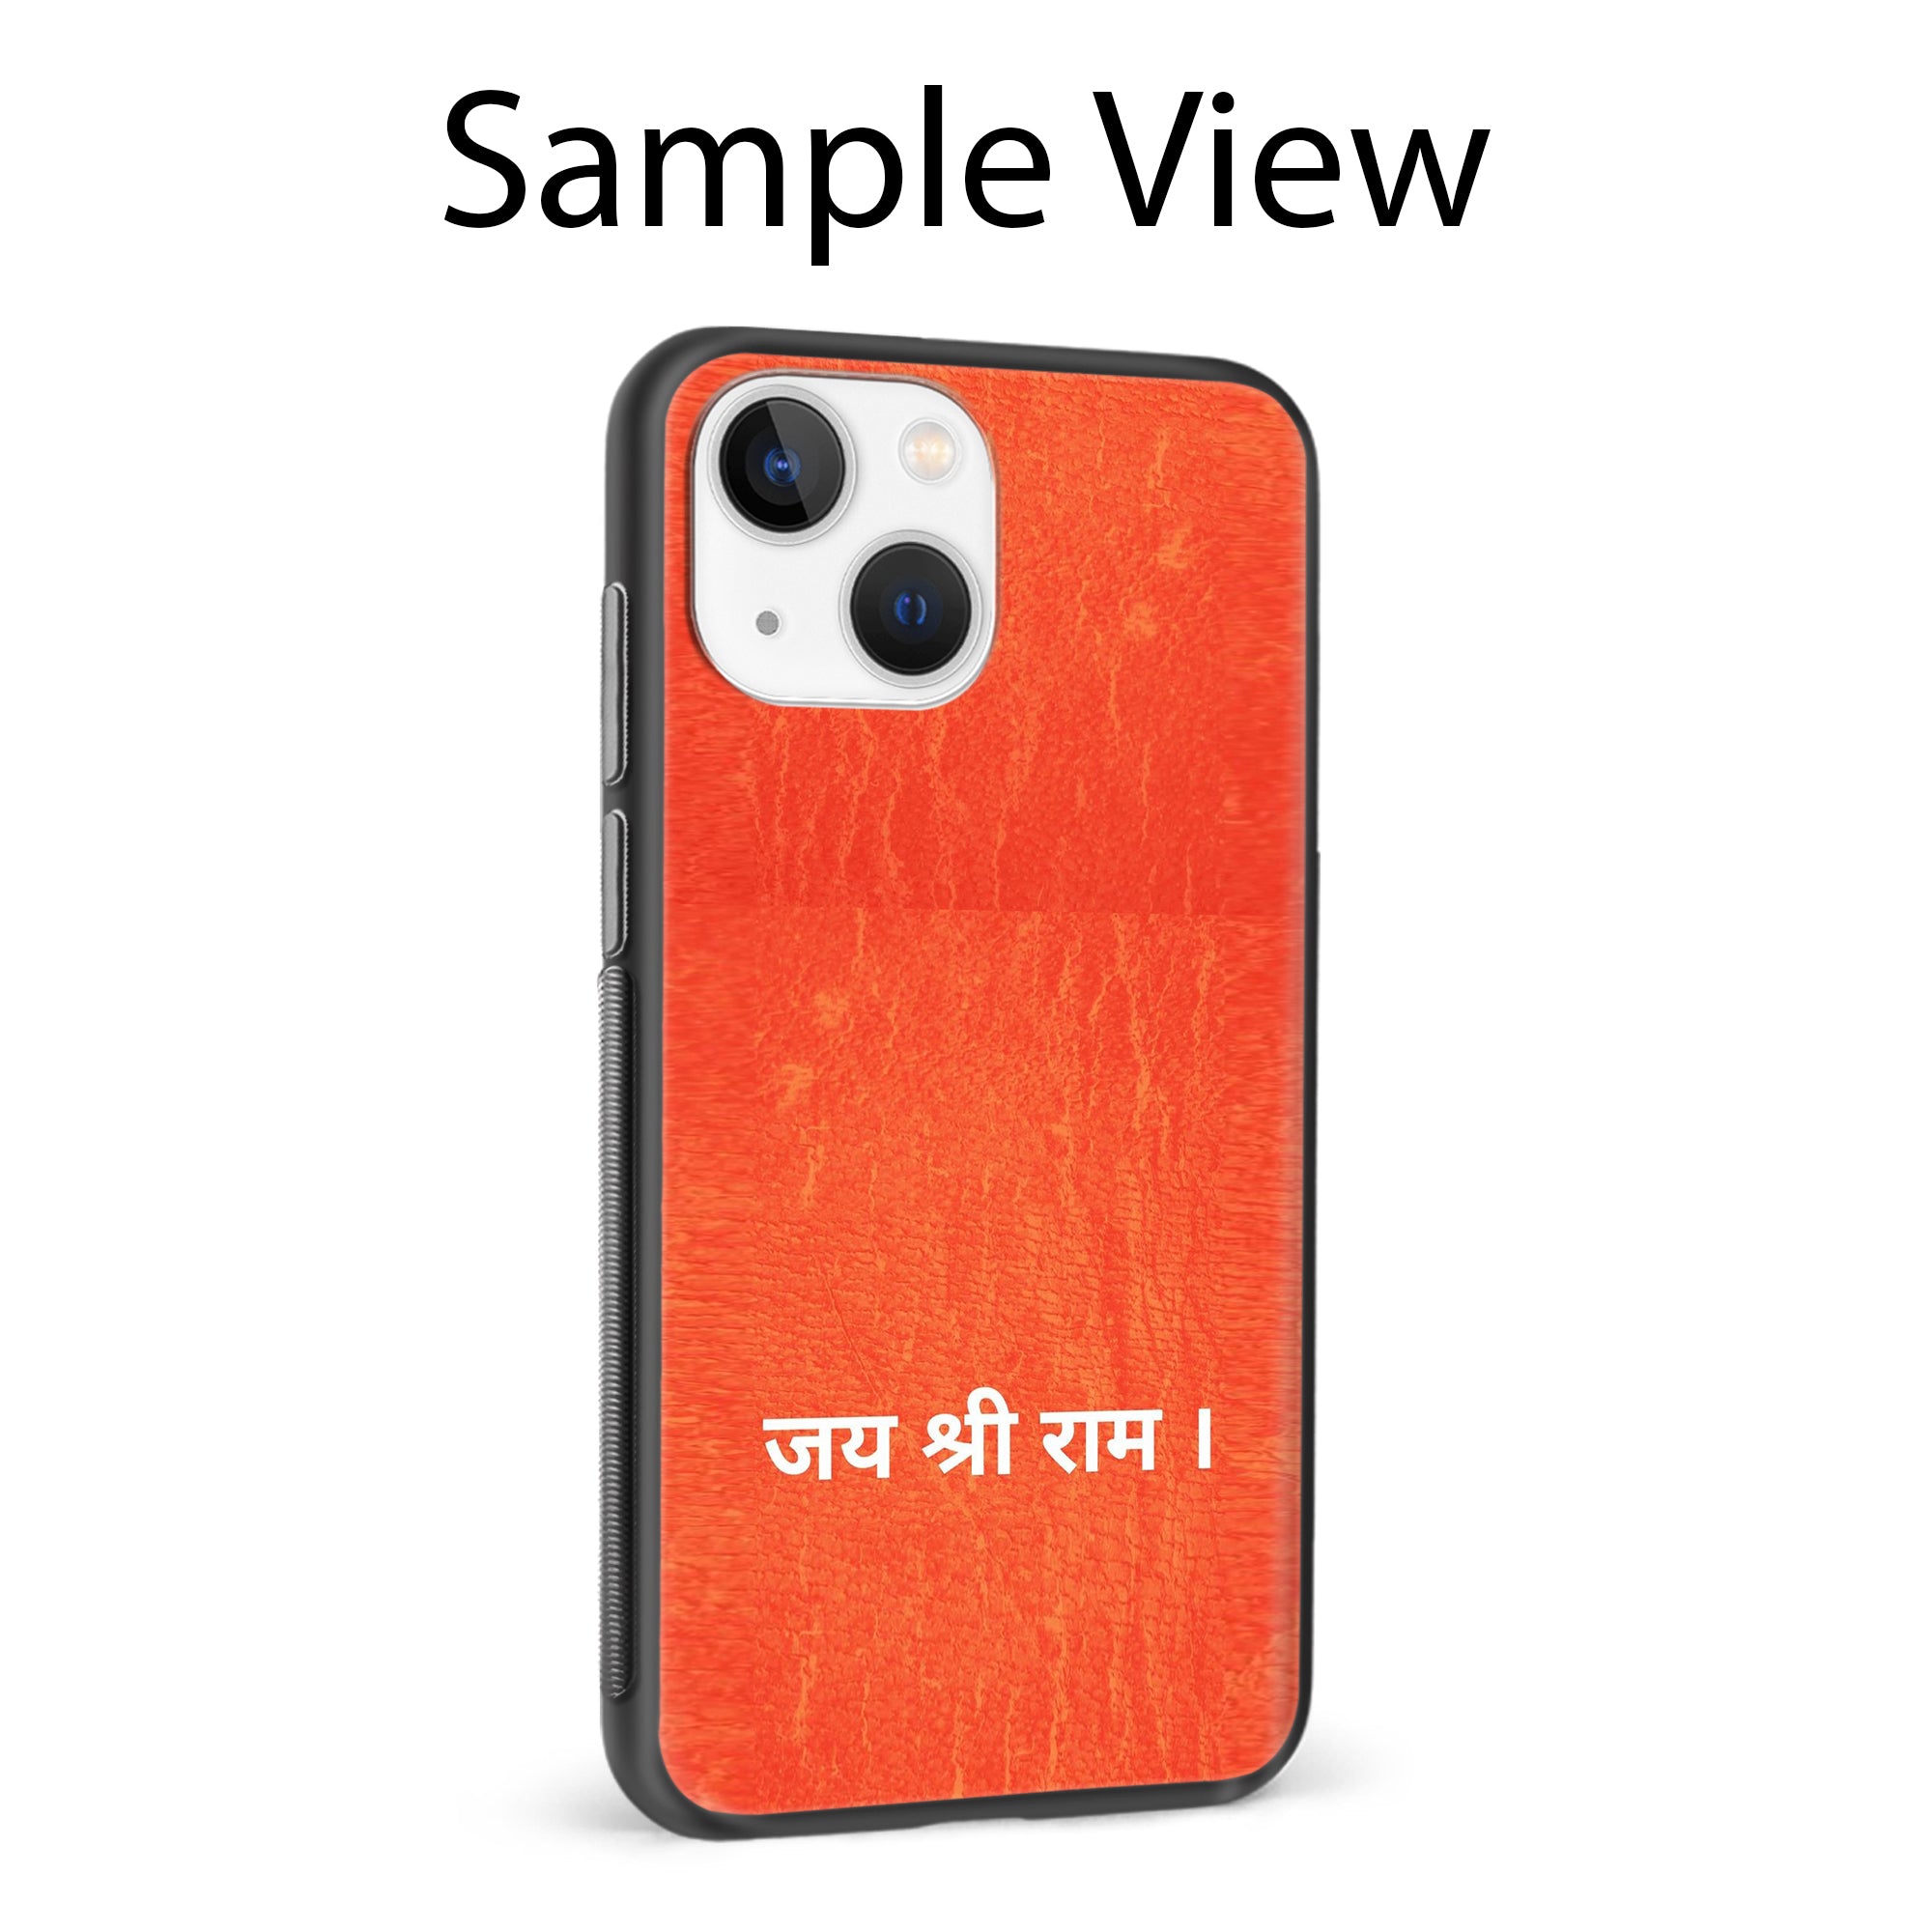 Buy Jai Shree Ram Metal-Silicon Back Mobile Phone Case/Cover For Samsung A33 5G Online